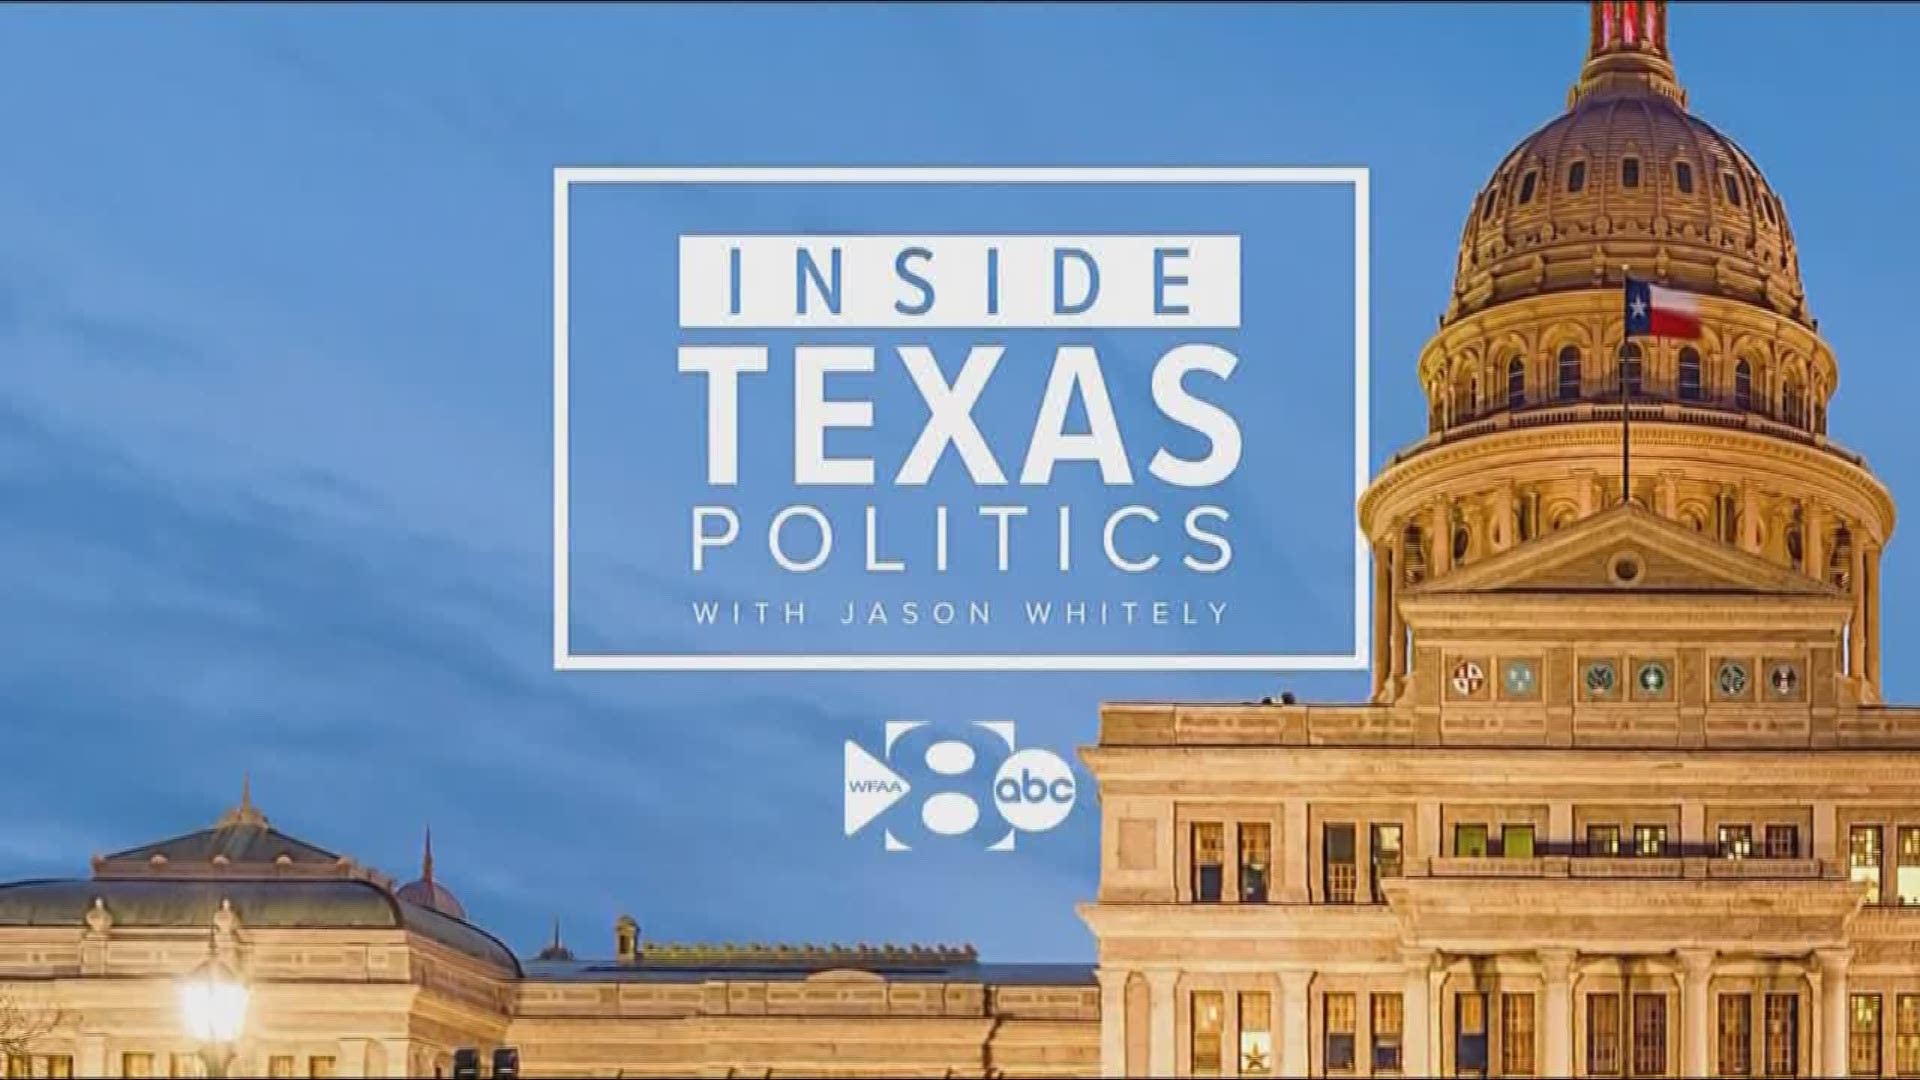 Inside Texas Politics began with Fort Worth Mayor Betsy Price. Mayor Price discussed whether she'll run for a third term in May. She also talked about the politics in Tarrant County. Mayor Price joined host Jason Whitely and Bud Kennedy from the Star-Tele